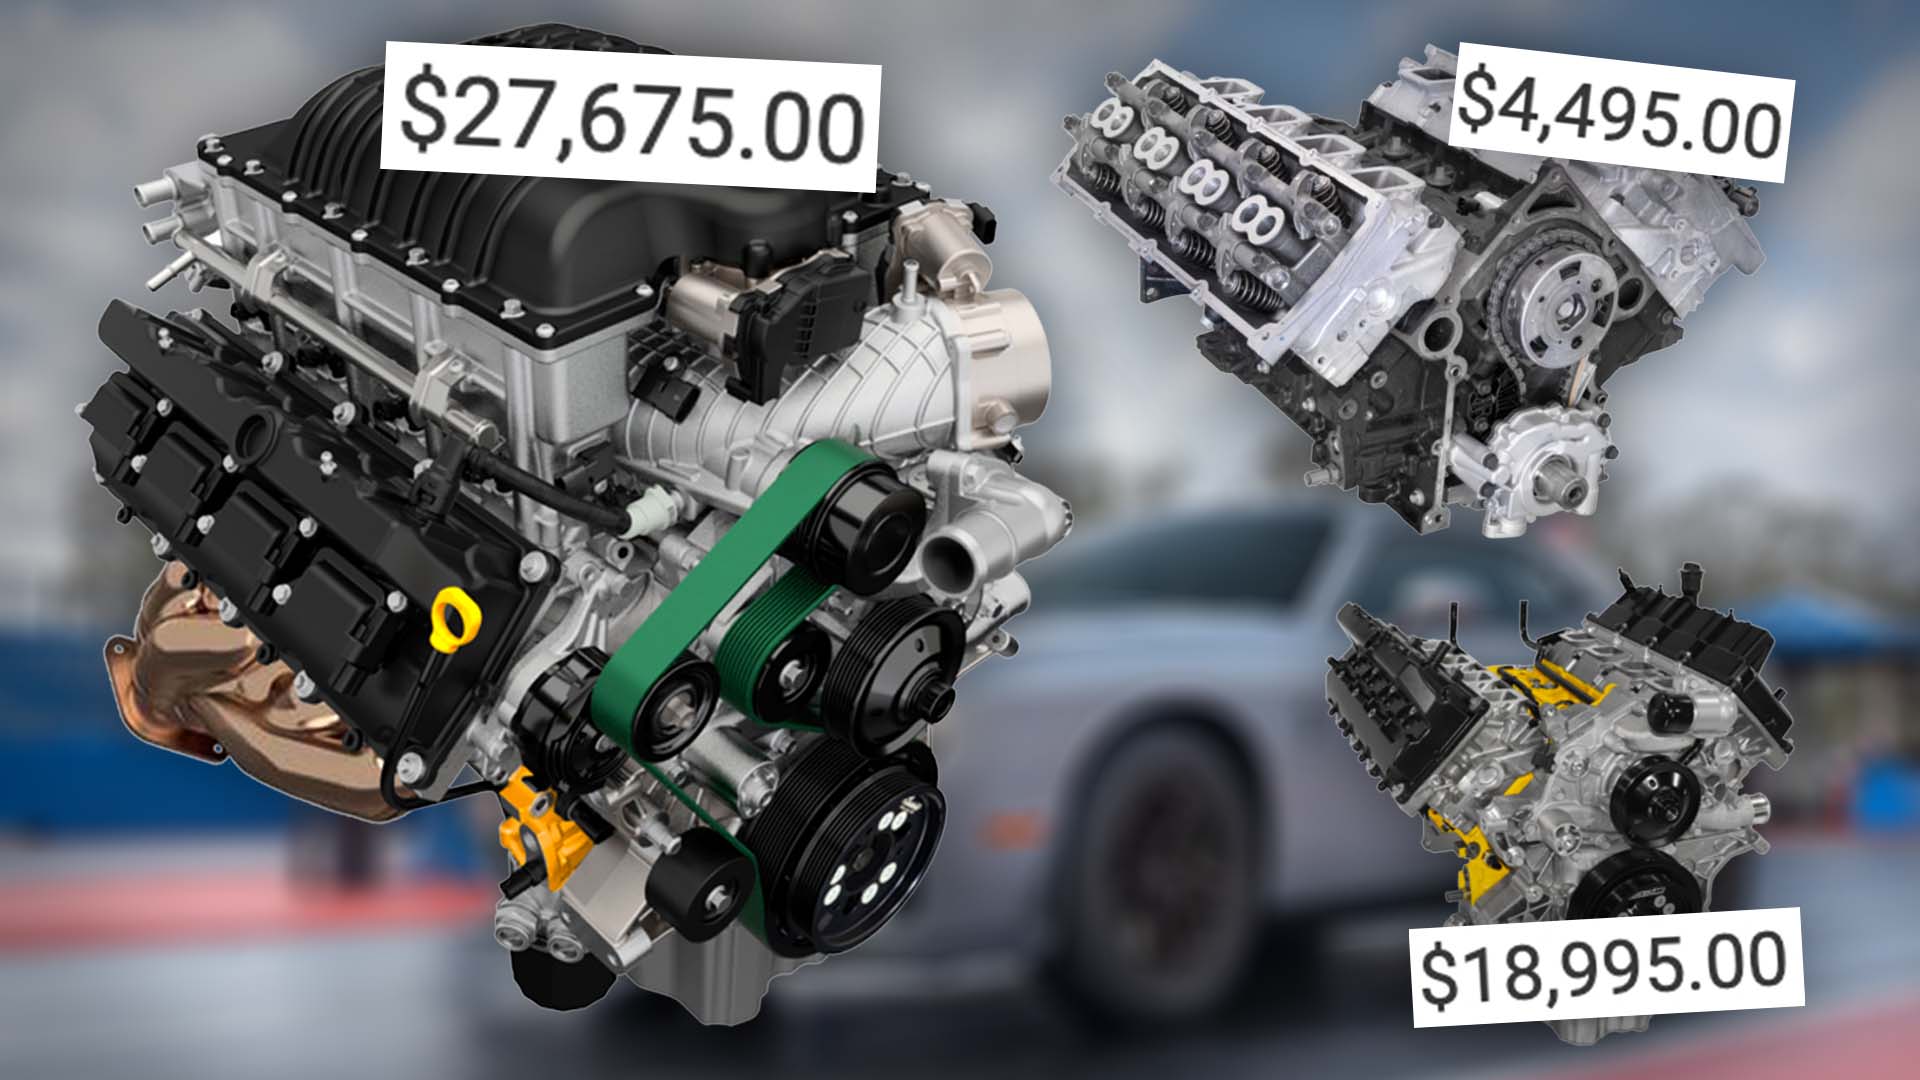 New Dodge Crate Engines Include 1,025-HP Demon 170 V8 for $27,695